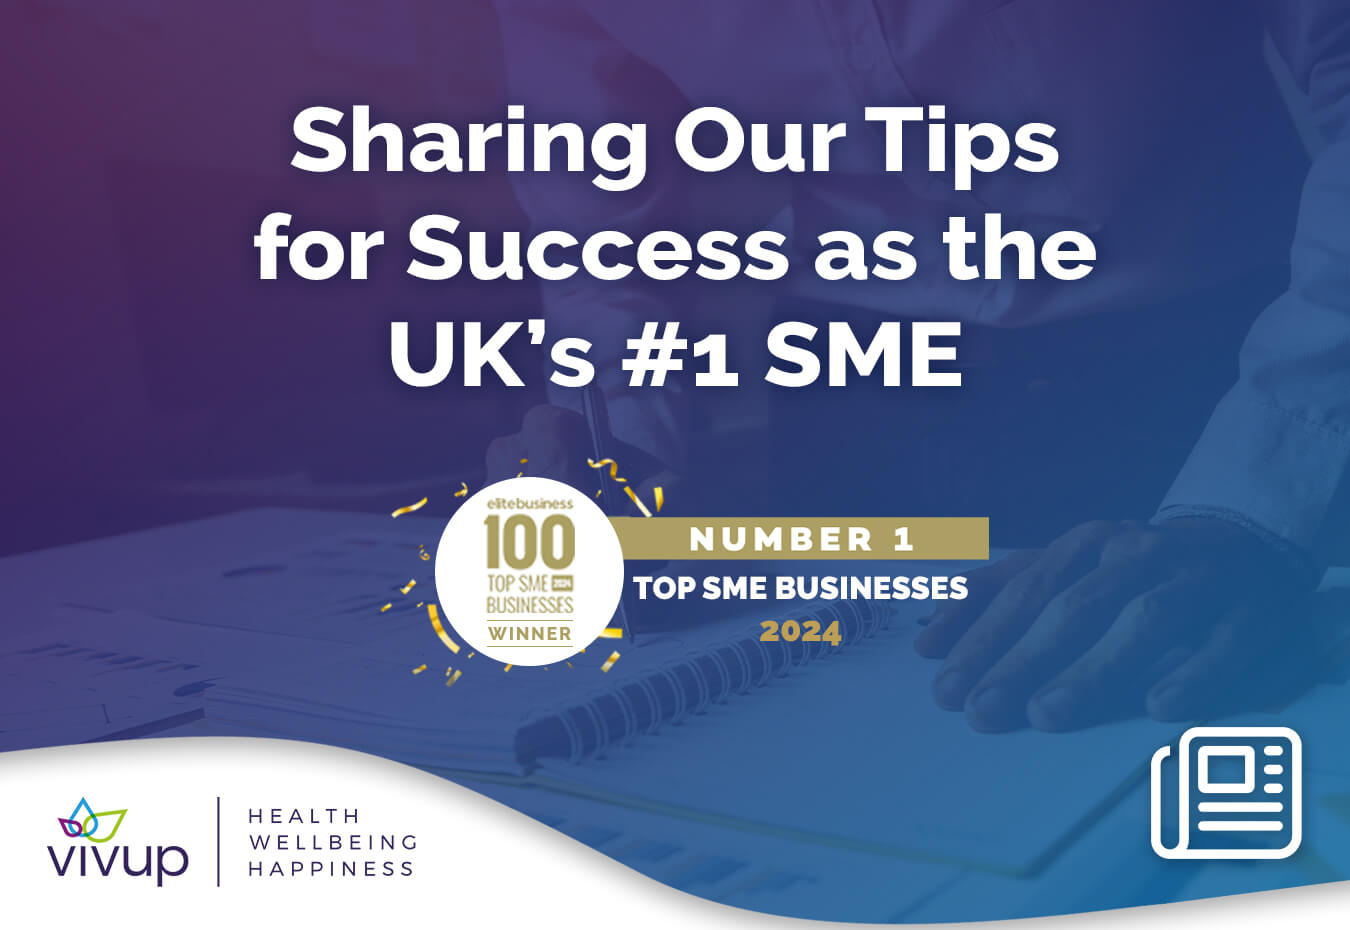 Top Tips for Success for SMEs